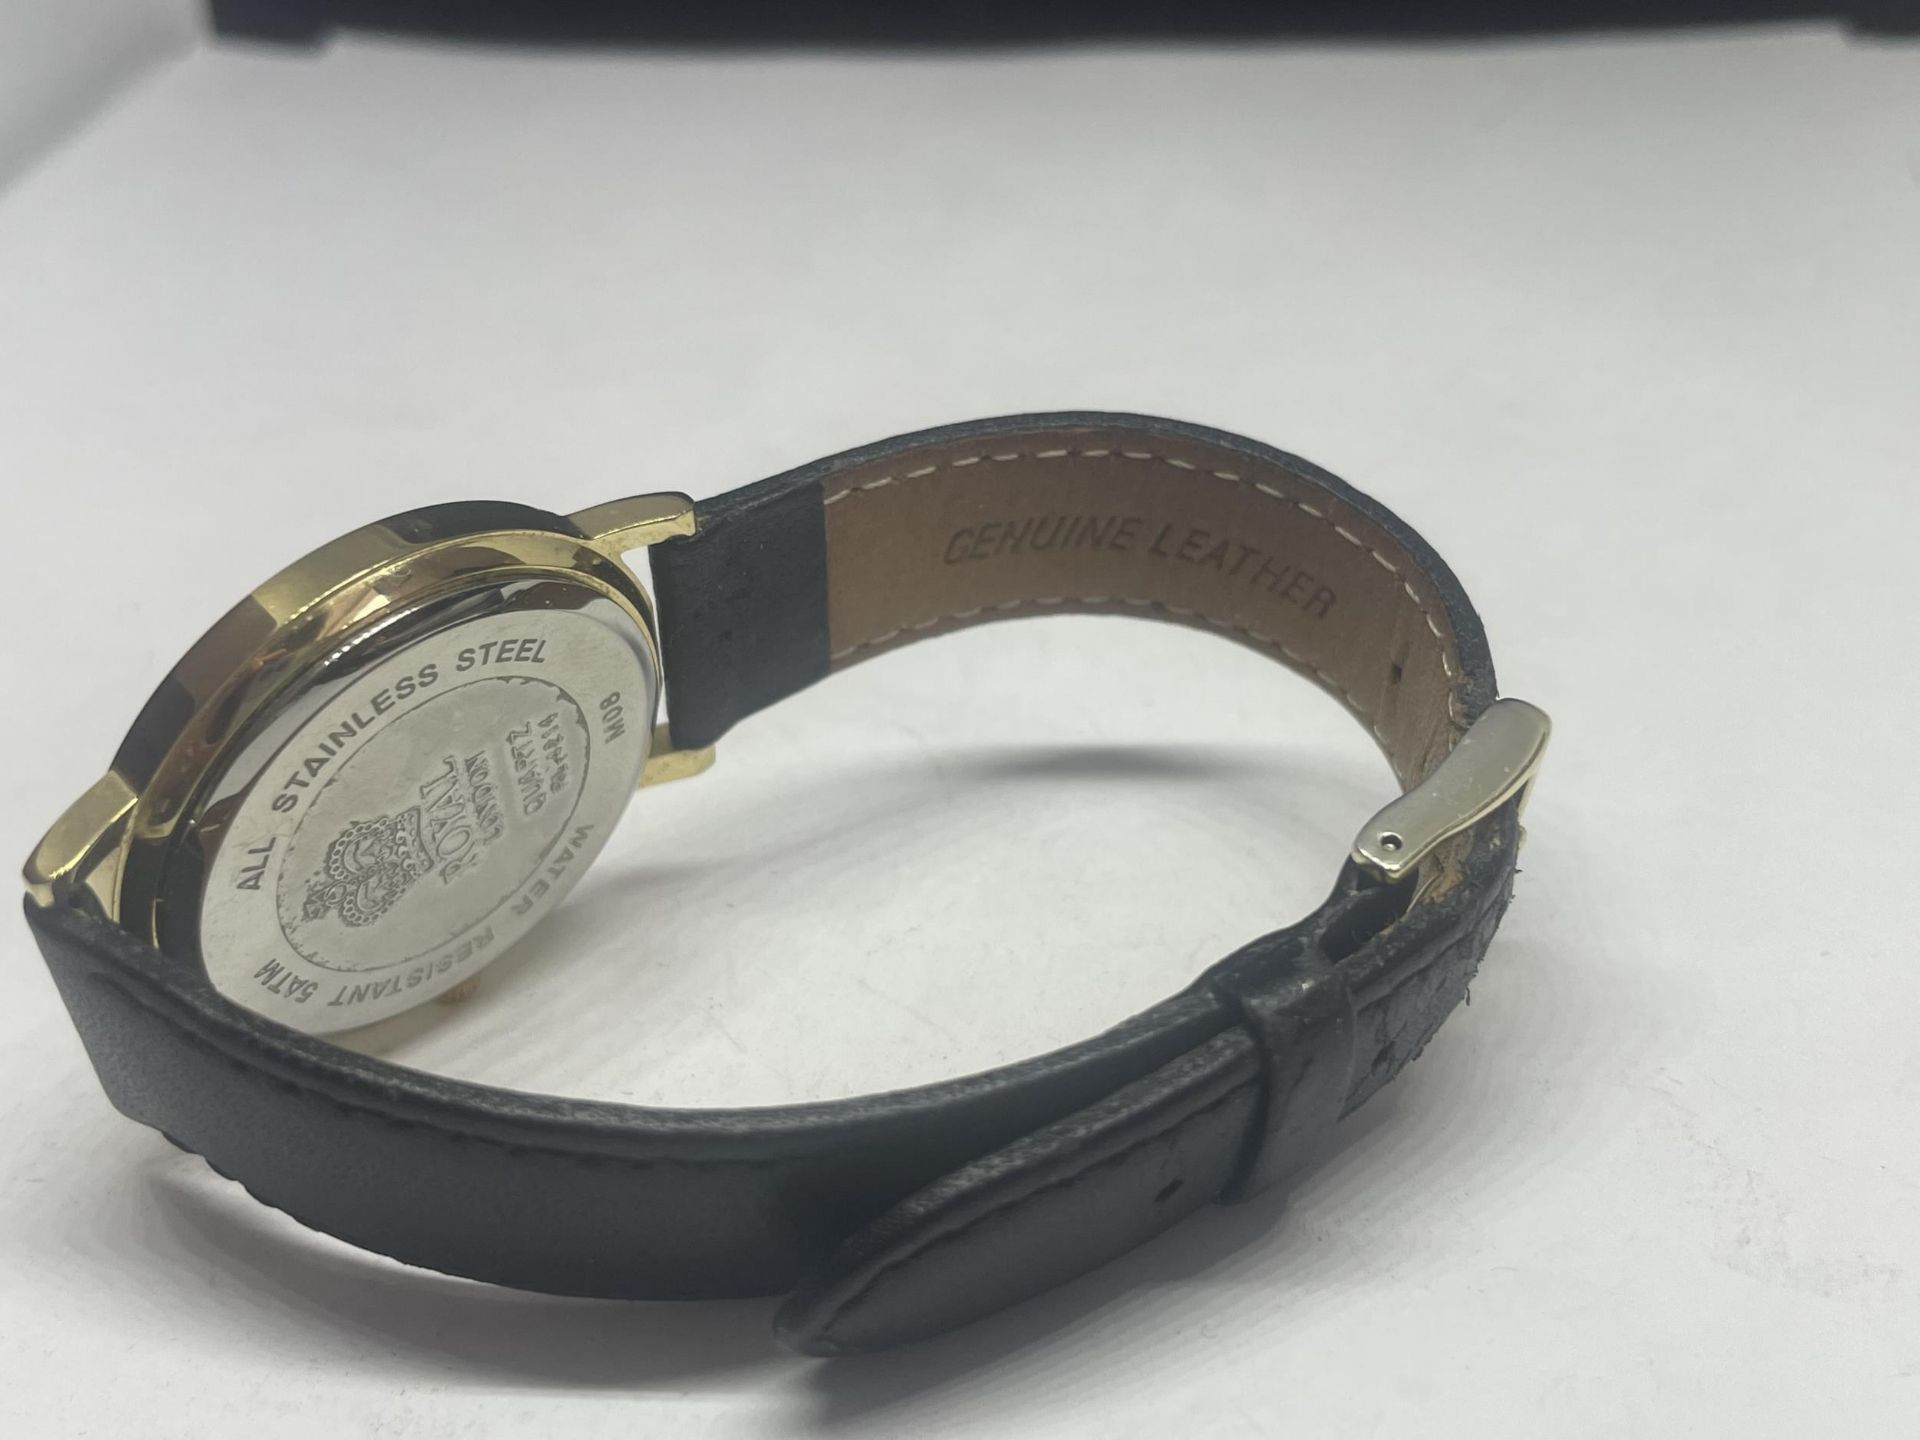 A ROYAL LONDON WRSIT WATCH WITH BLACK LEATHER STRAP SEEN WORKING BUT NO WARRANTY - Image 3 of 3